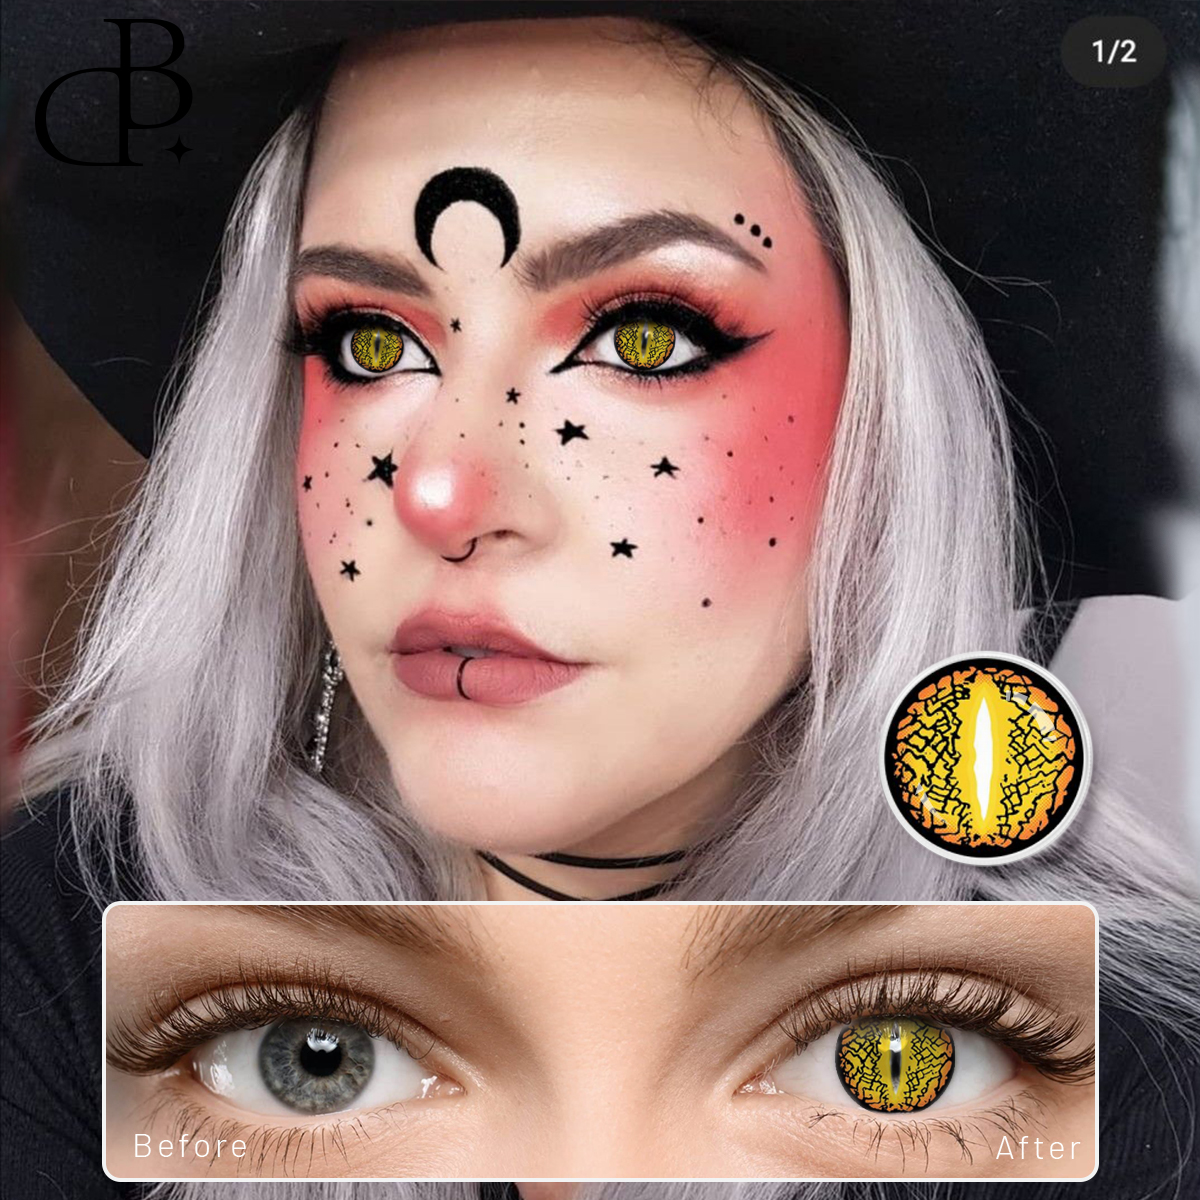 saese 14.5mm New SNAKE EYES yellow Colored Contact Lenses crazy lens halloween color contact lens